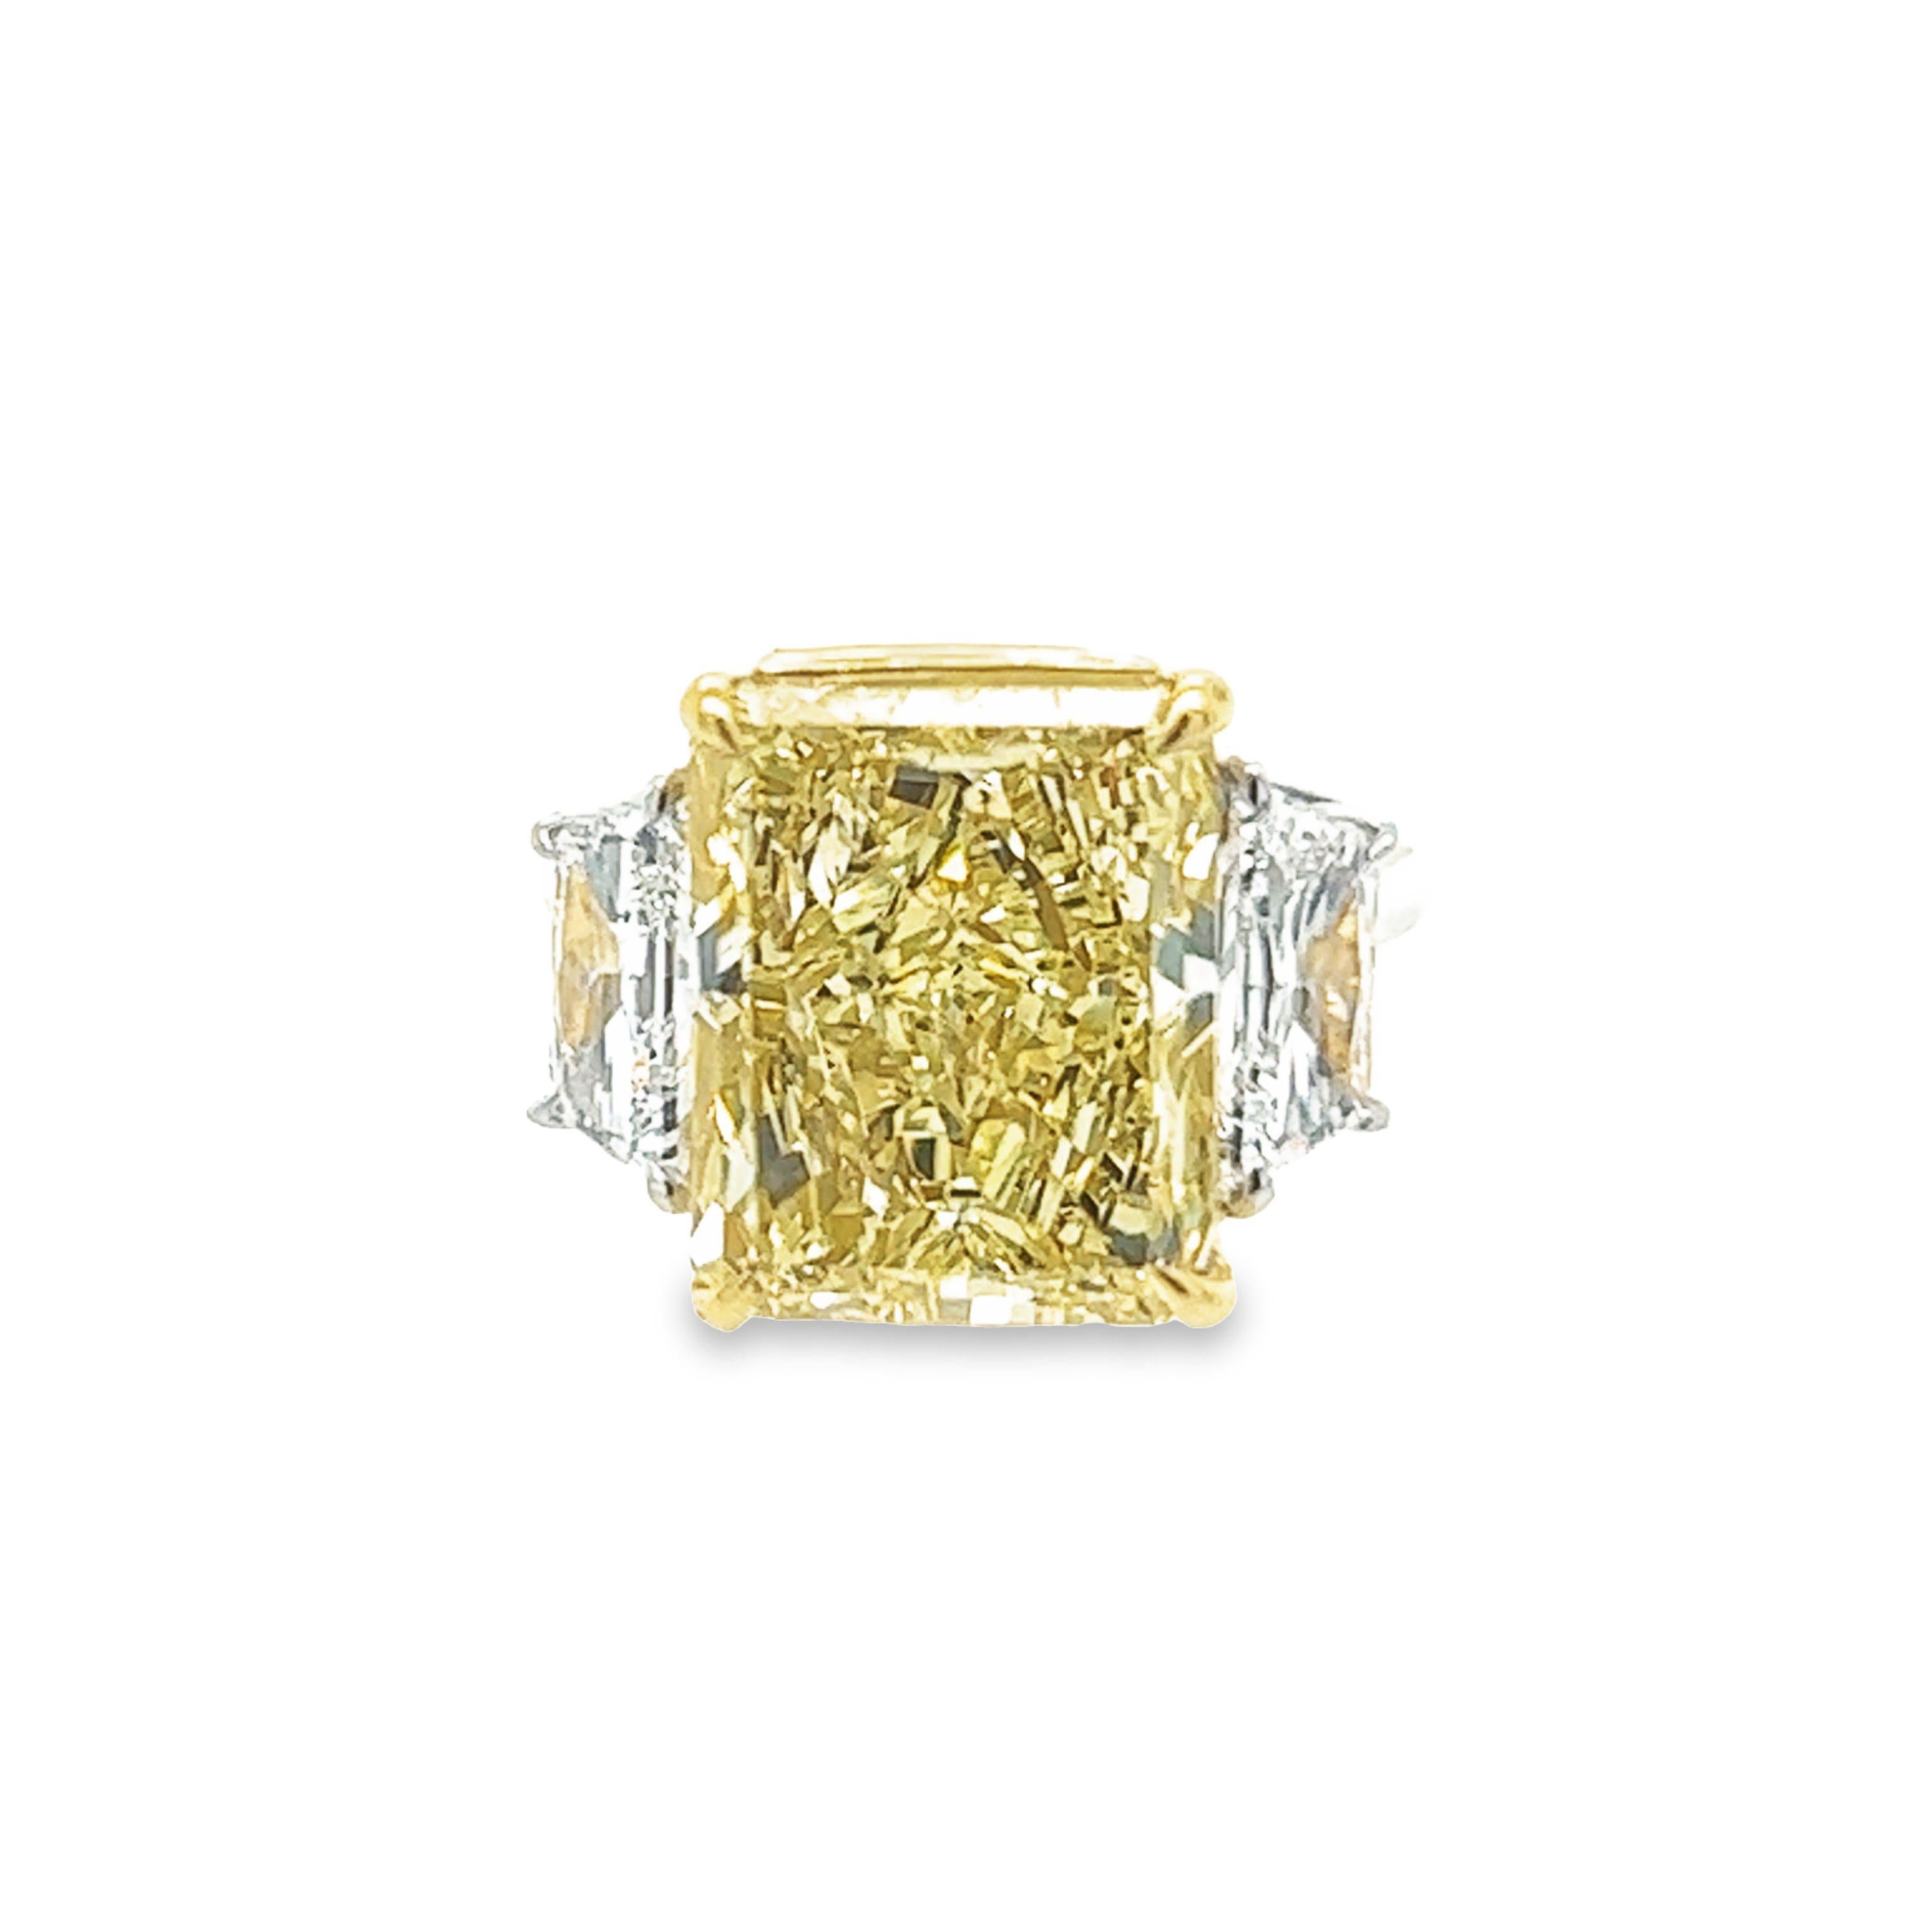 Rosenberg Diamonds & Co. 10.03 carat Radiant Cut Fancy Yellow VS2 clarity is accompanied by a GIA certificate. This extraordinary radiant cut is set in a handmade platinum & 18k yellow gold setting with perfectly matched pair of trapezoid side